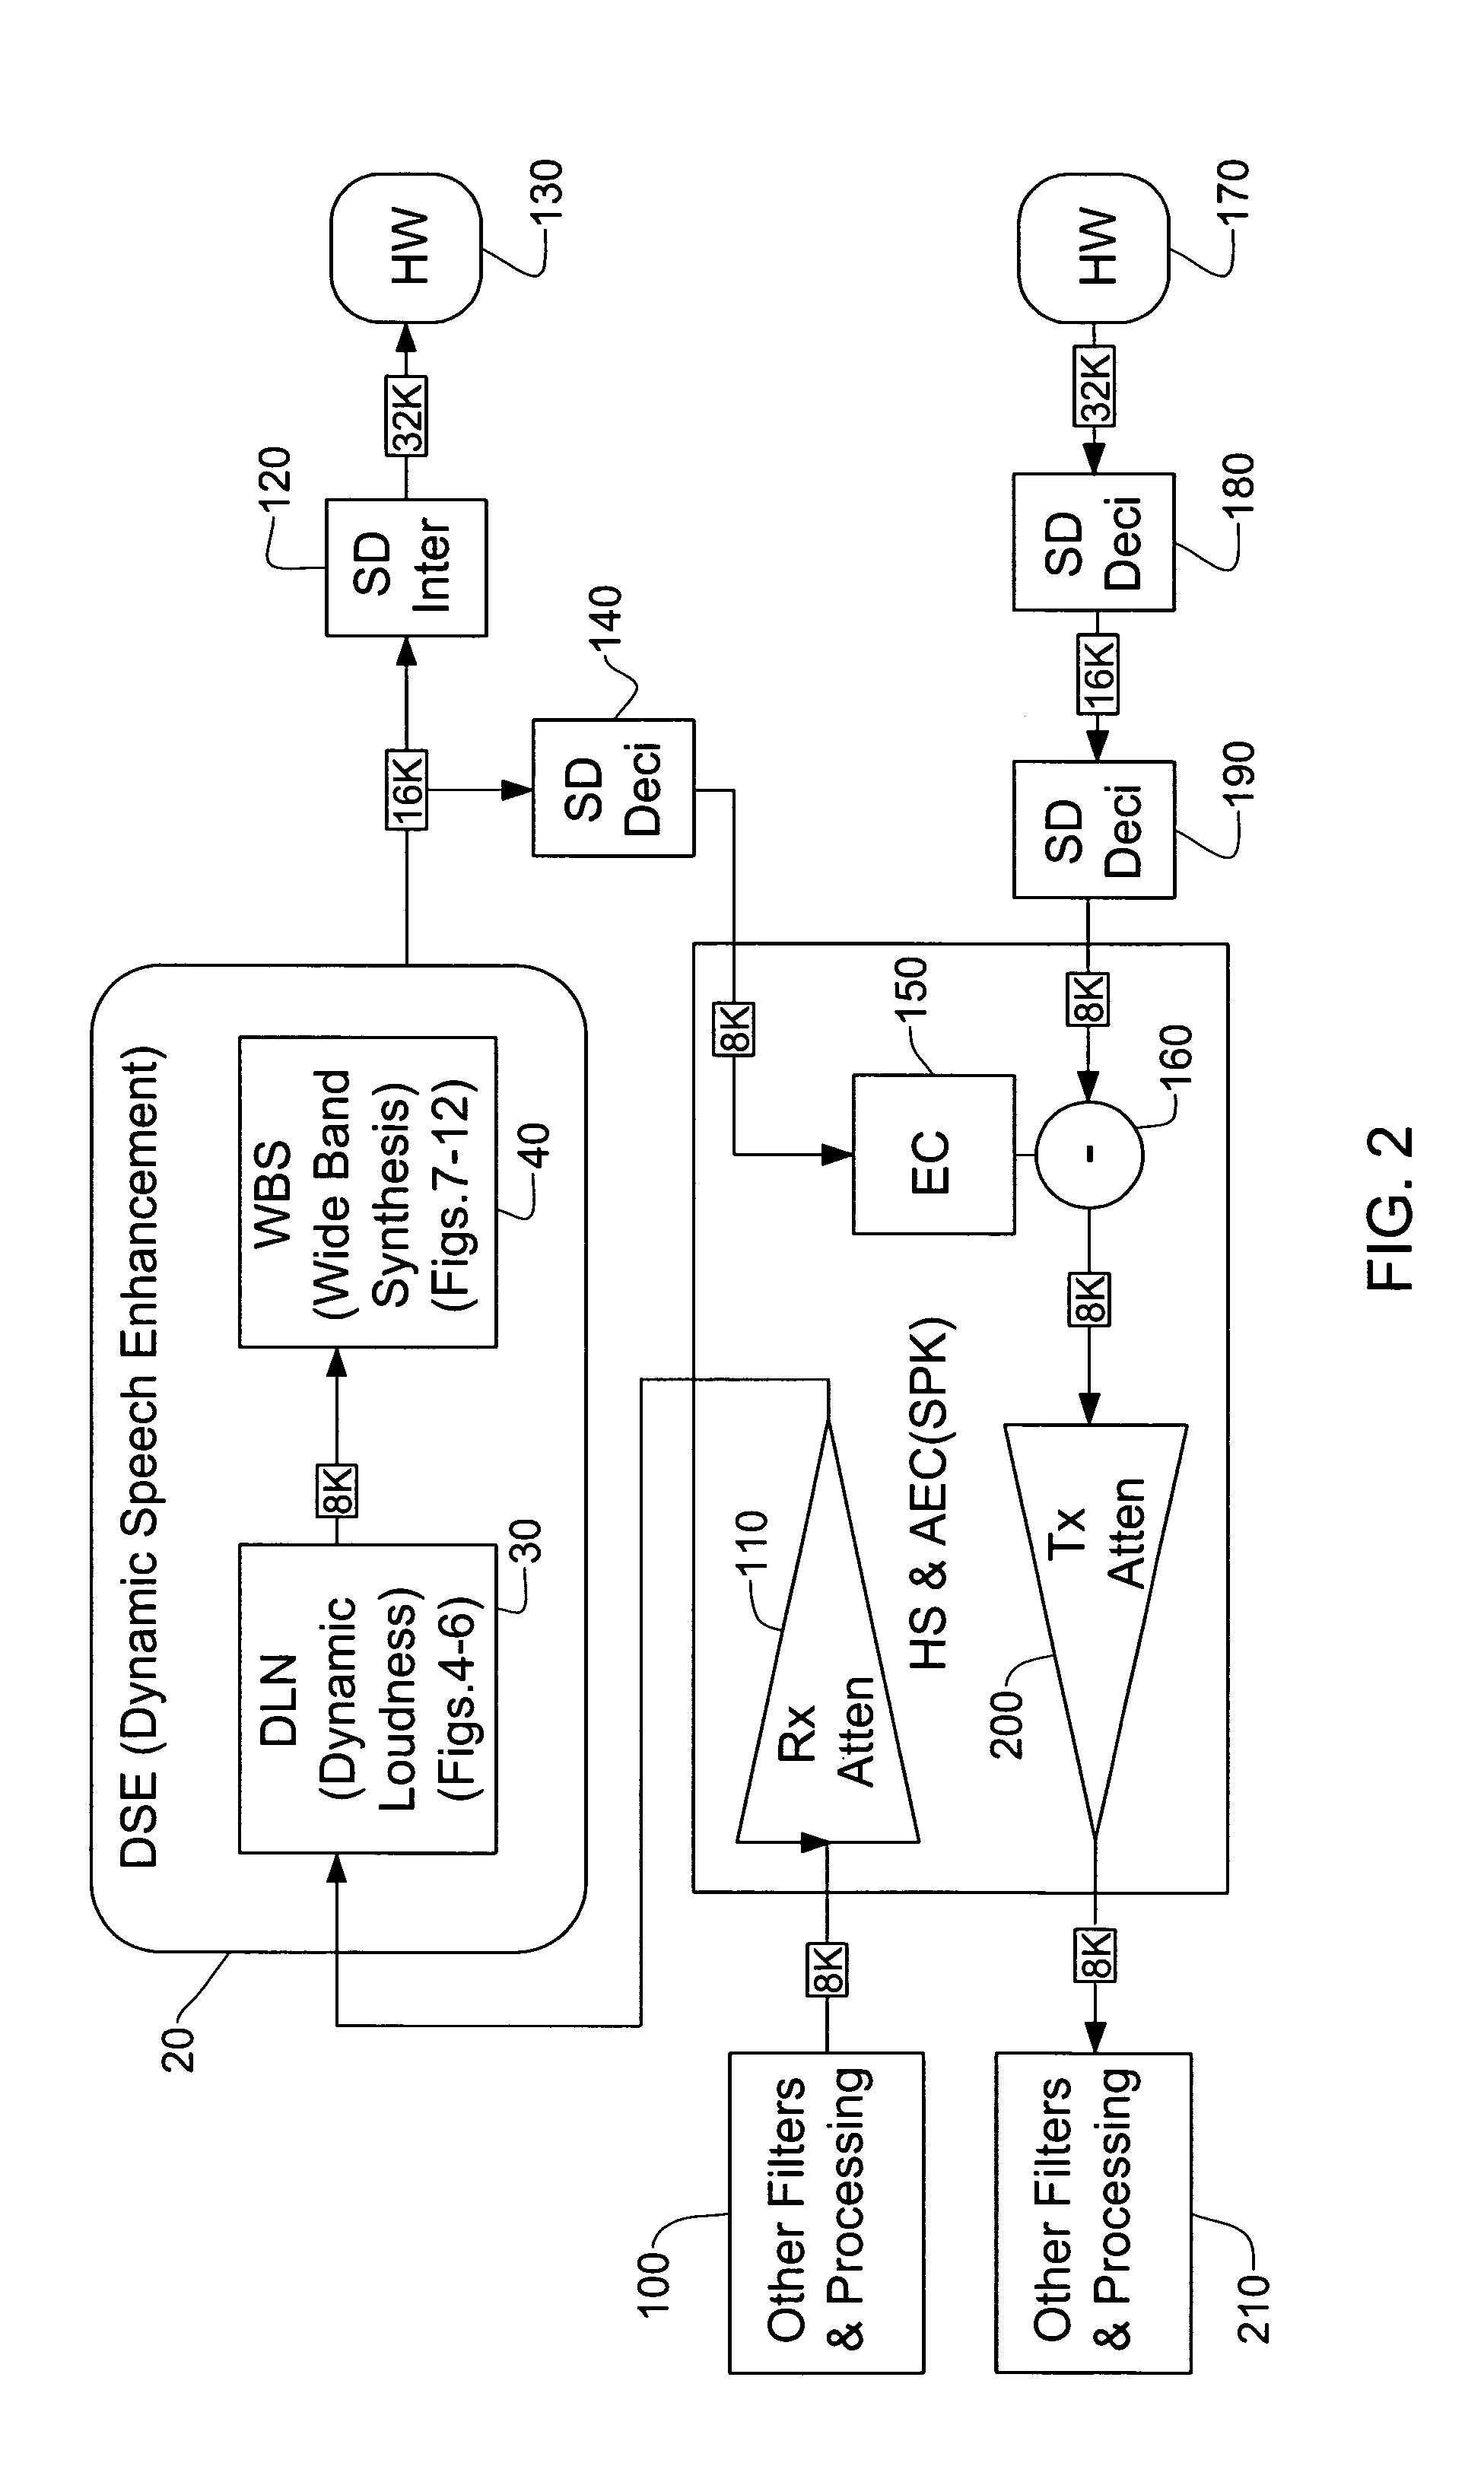 Apparatus and methods for enhancement of speech